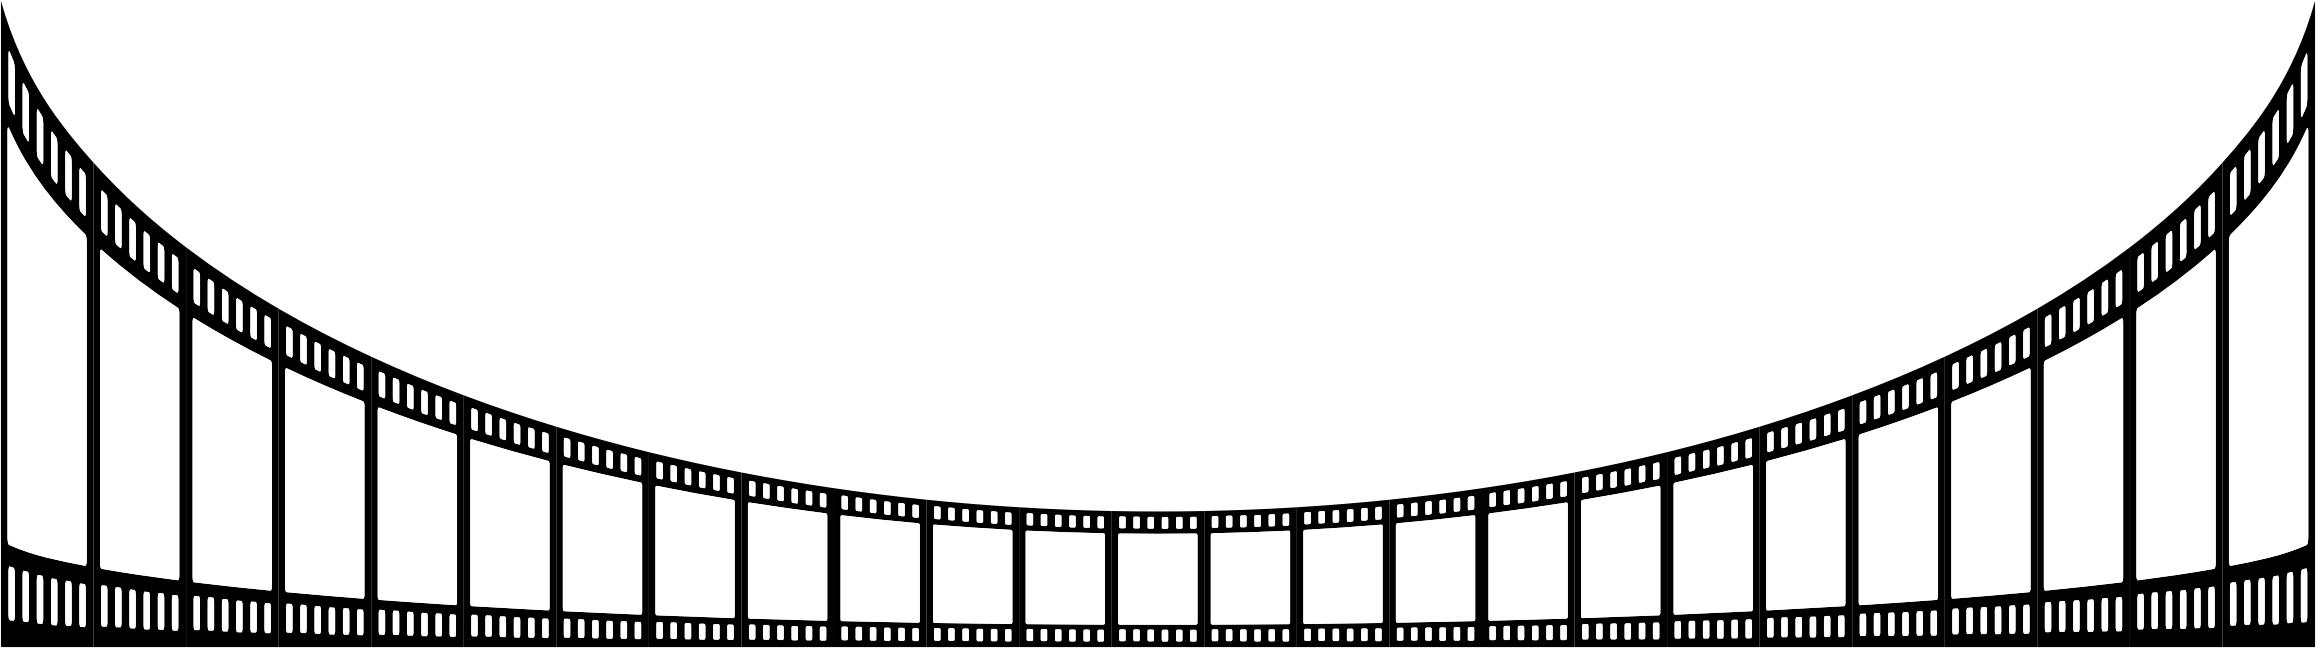 Film Strip Perspective 7 png